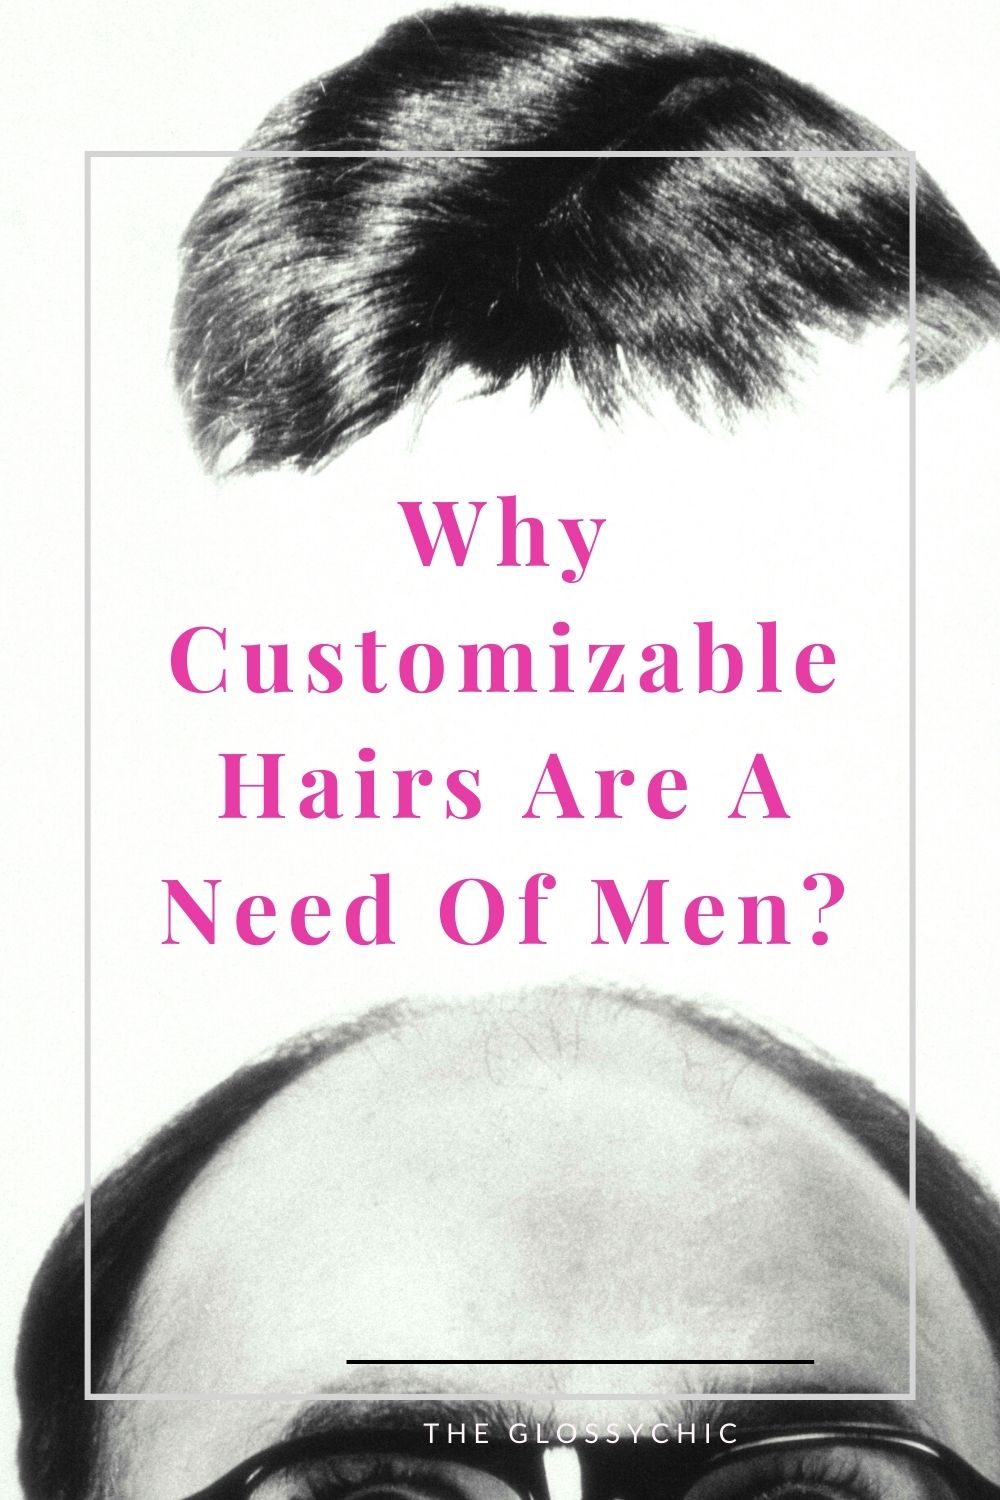 Why Customizable Hairs Are A Need Of Men?